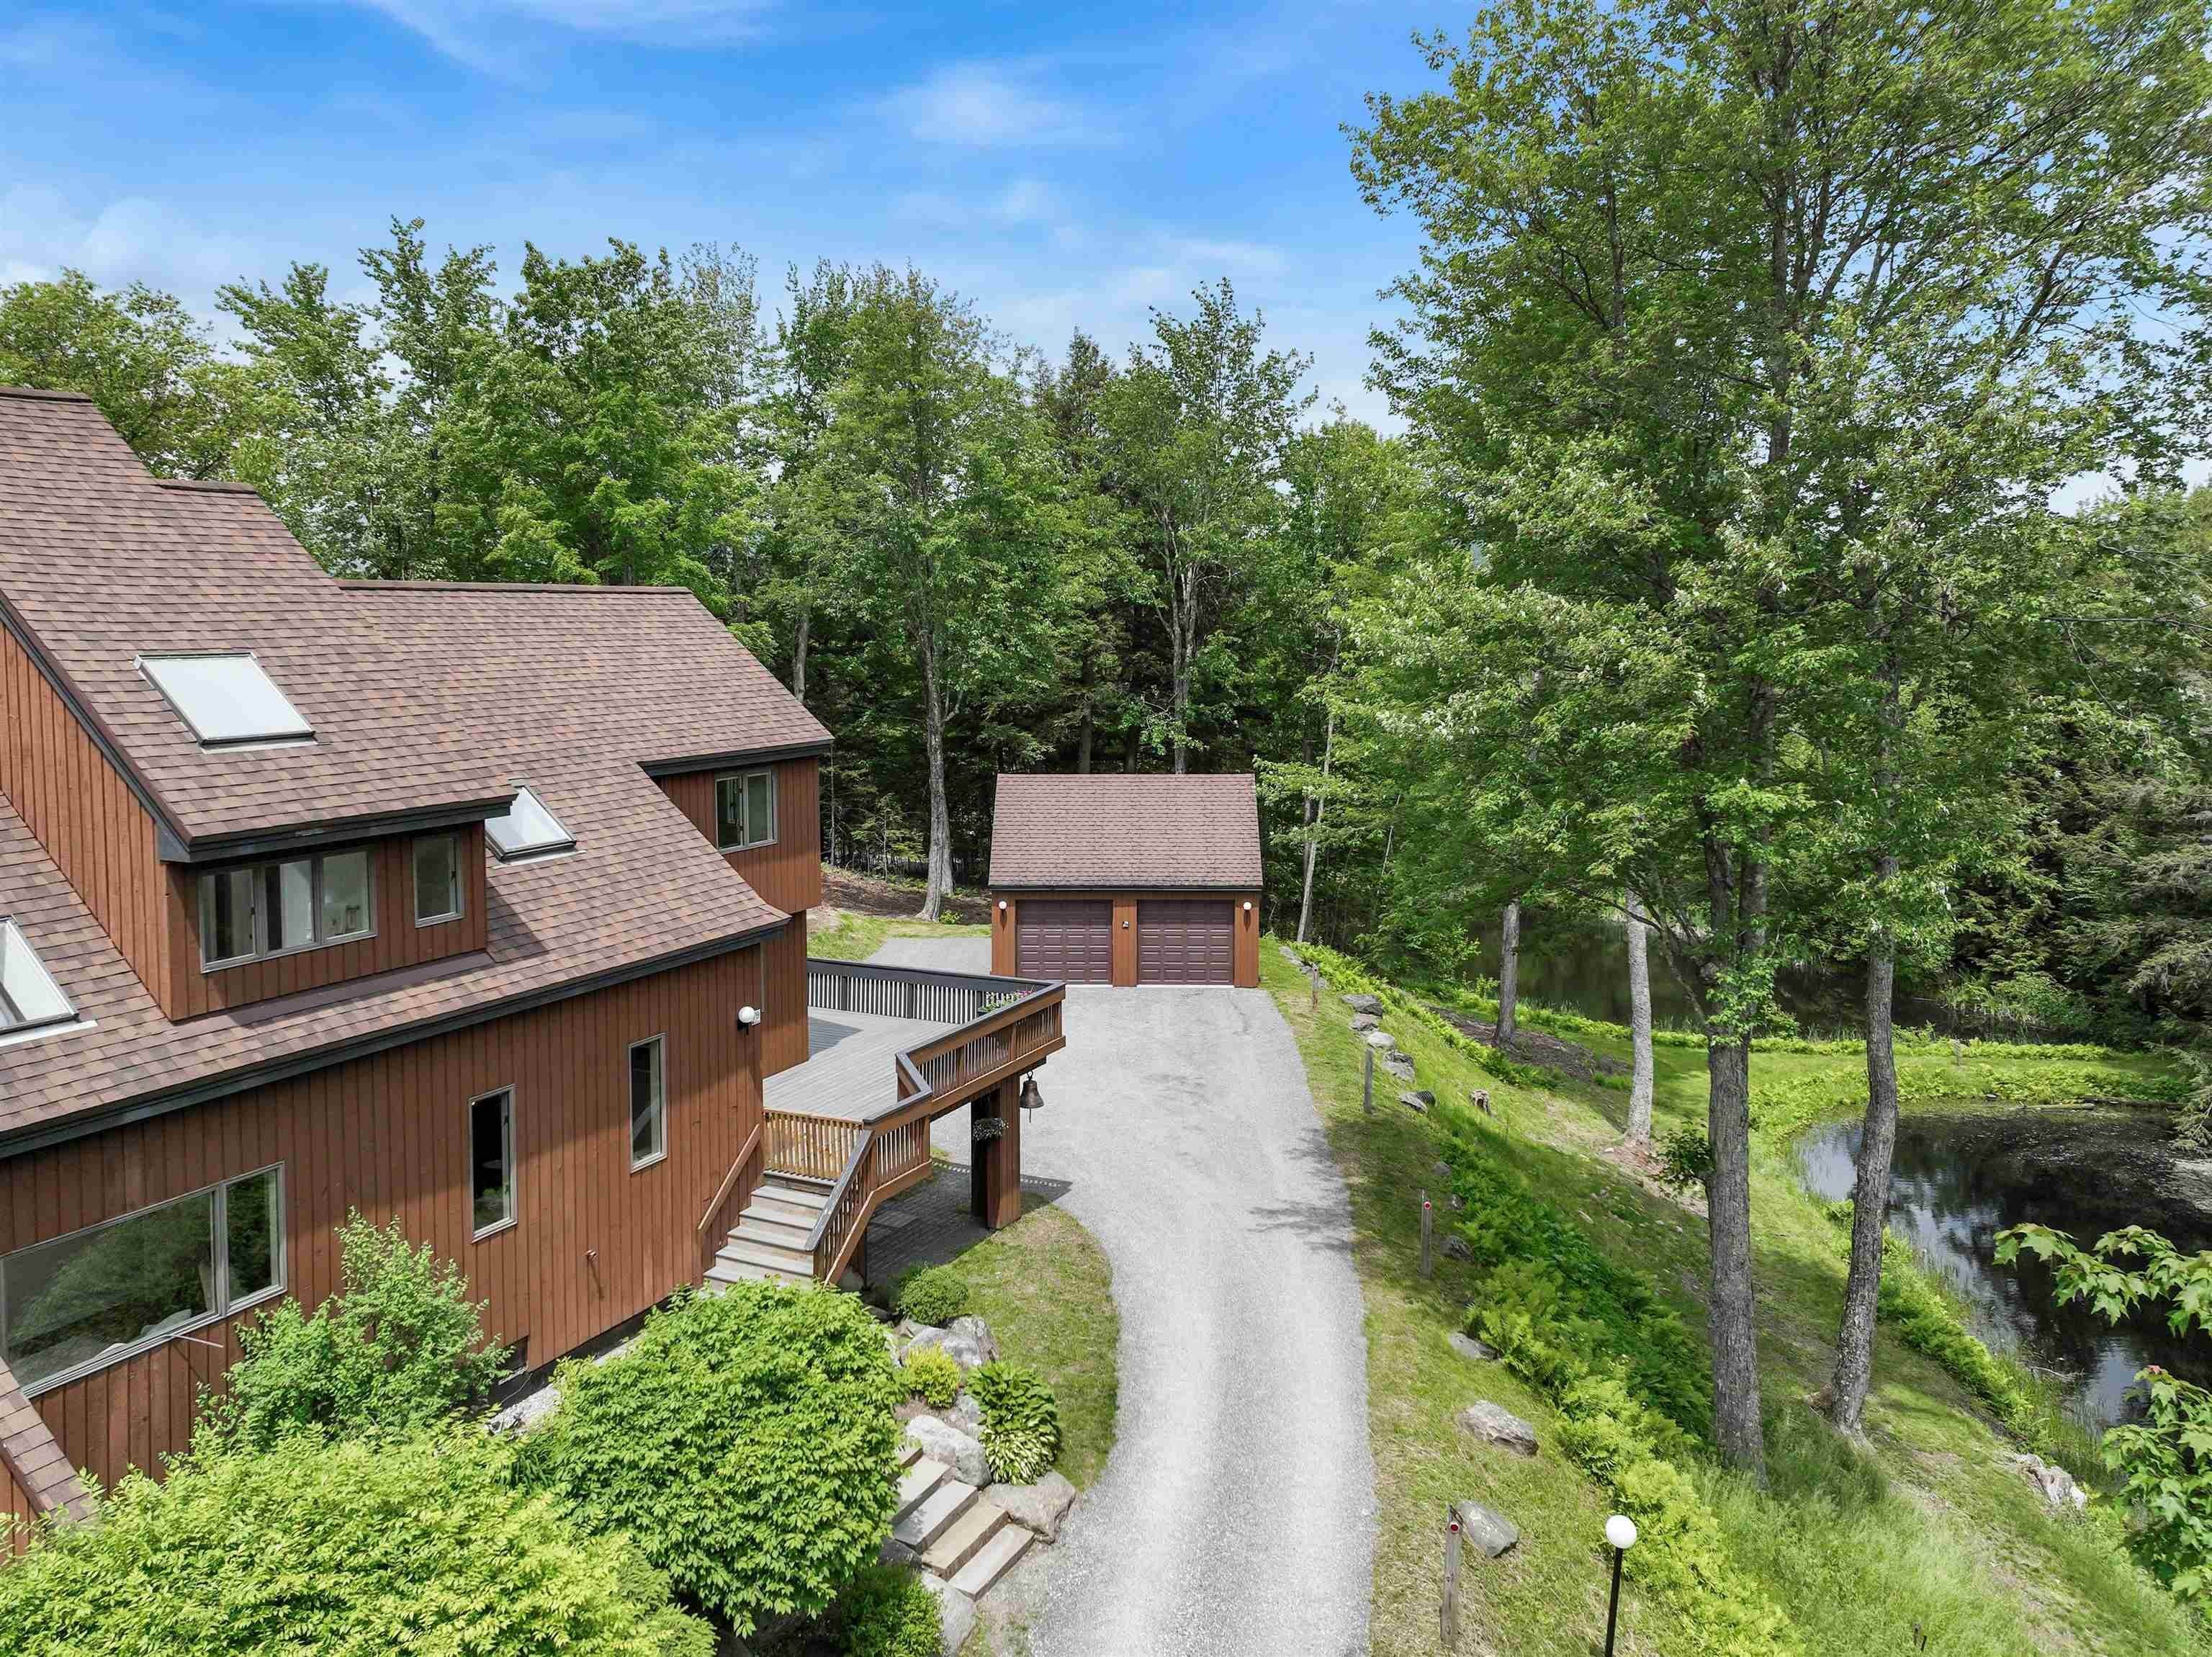 Condominiums for Sale at Stowe, VT 05672